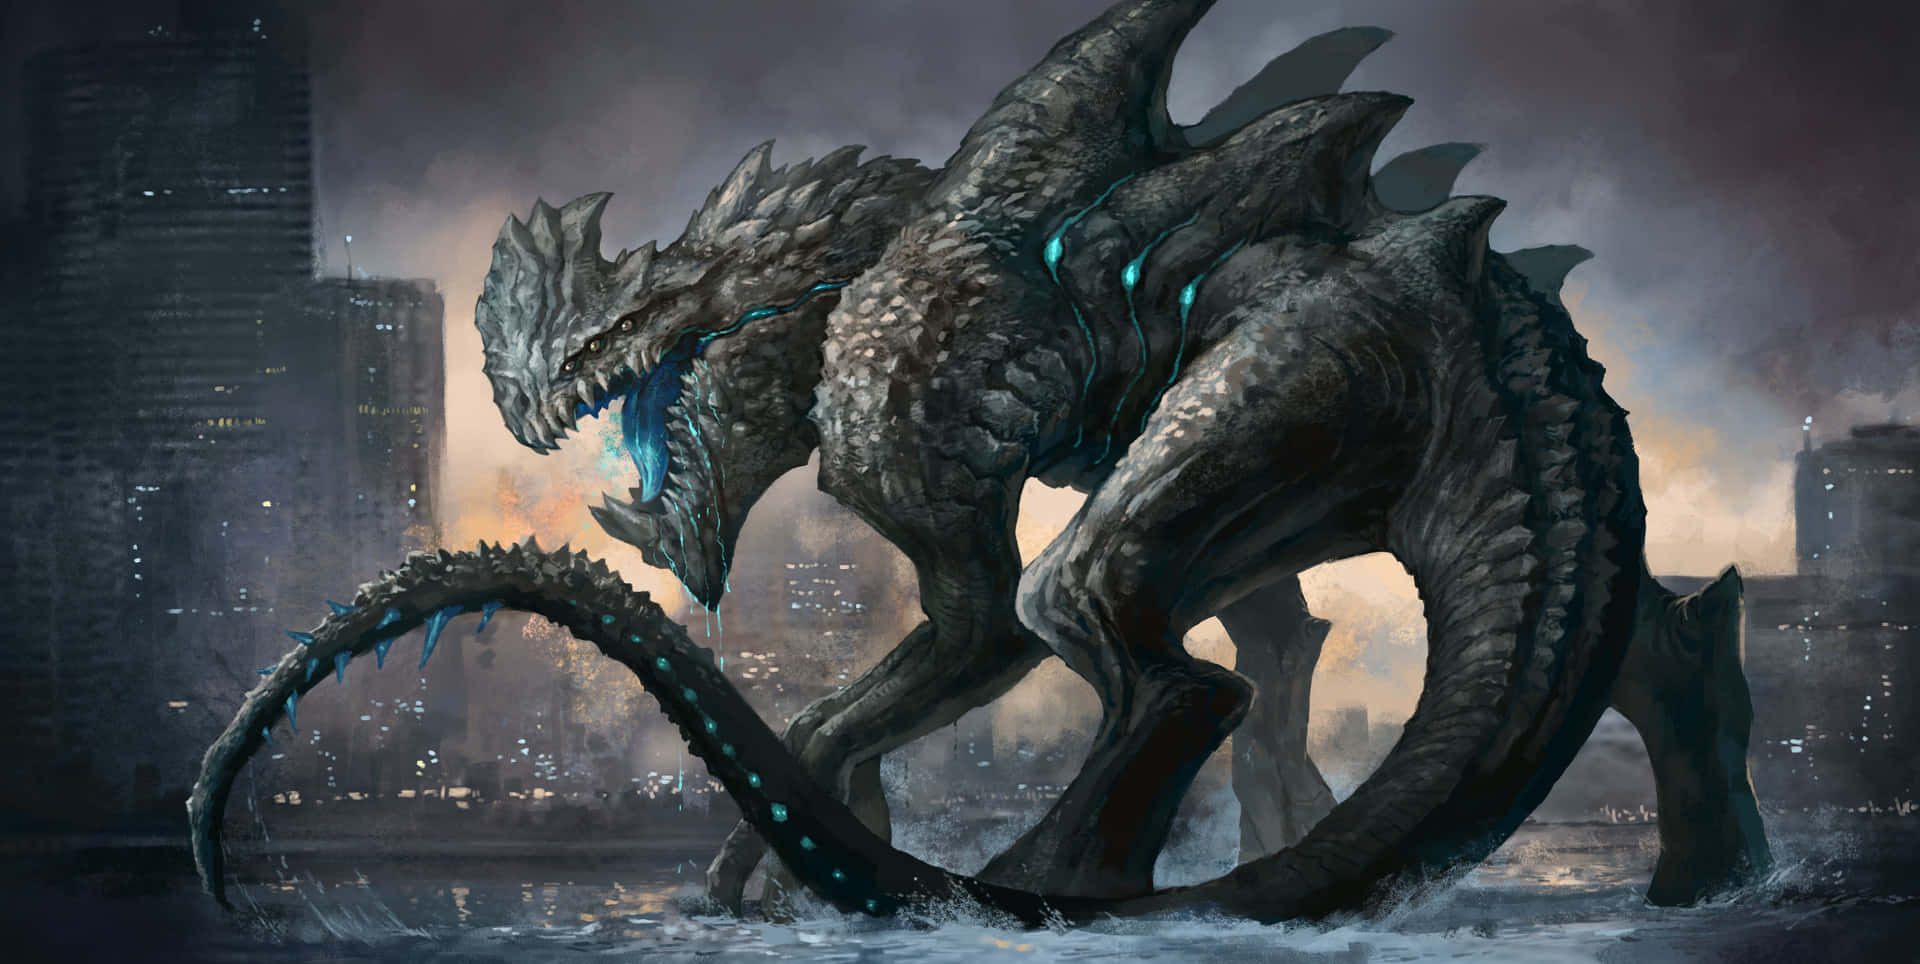 An Epic Battle Unfolds Between Colossal Kaiju Monsters In A City Under Siege. Background